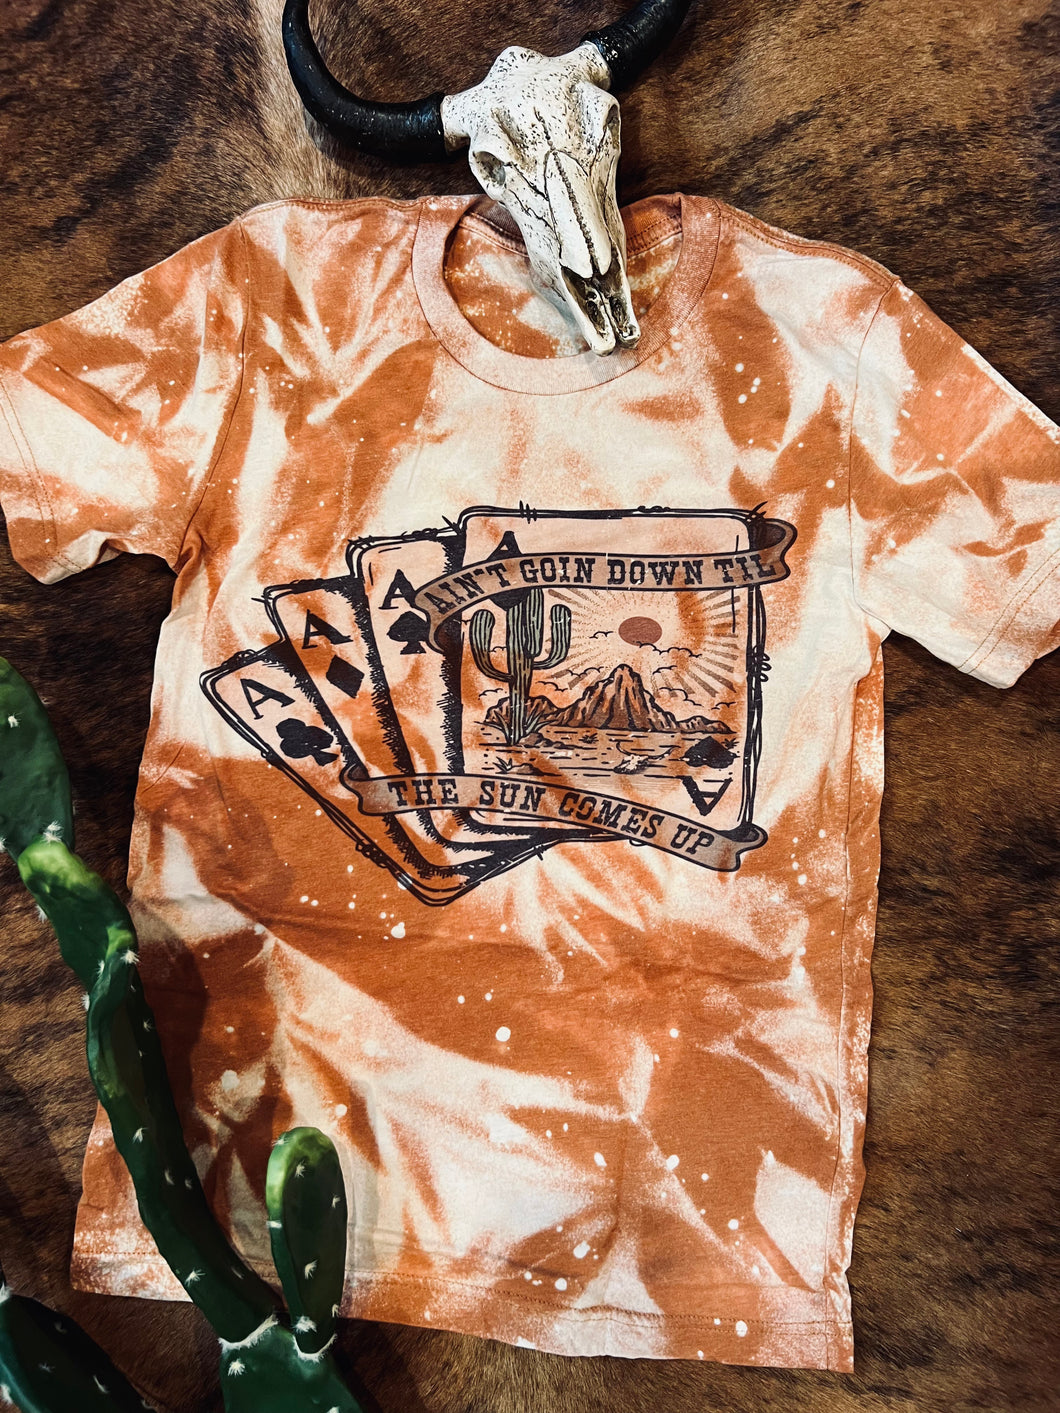 Ain’t going down till the sun comes up (rust tee )